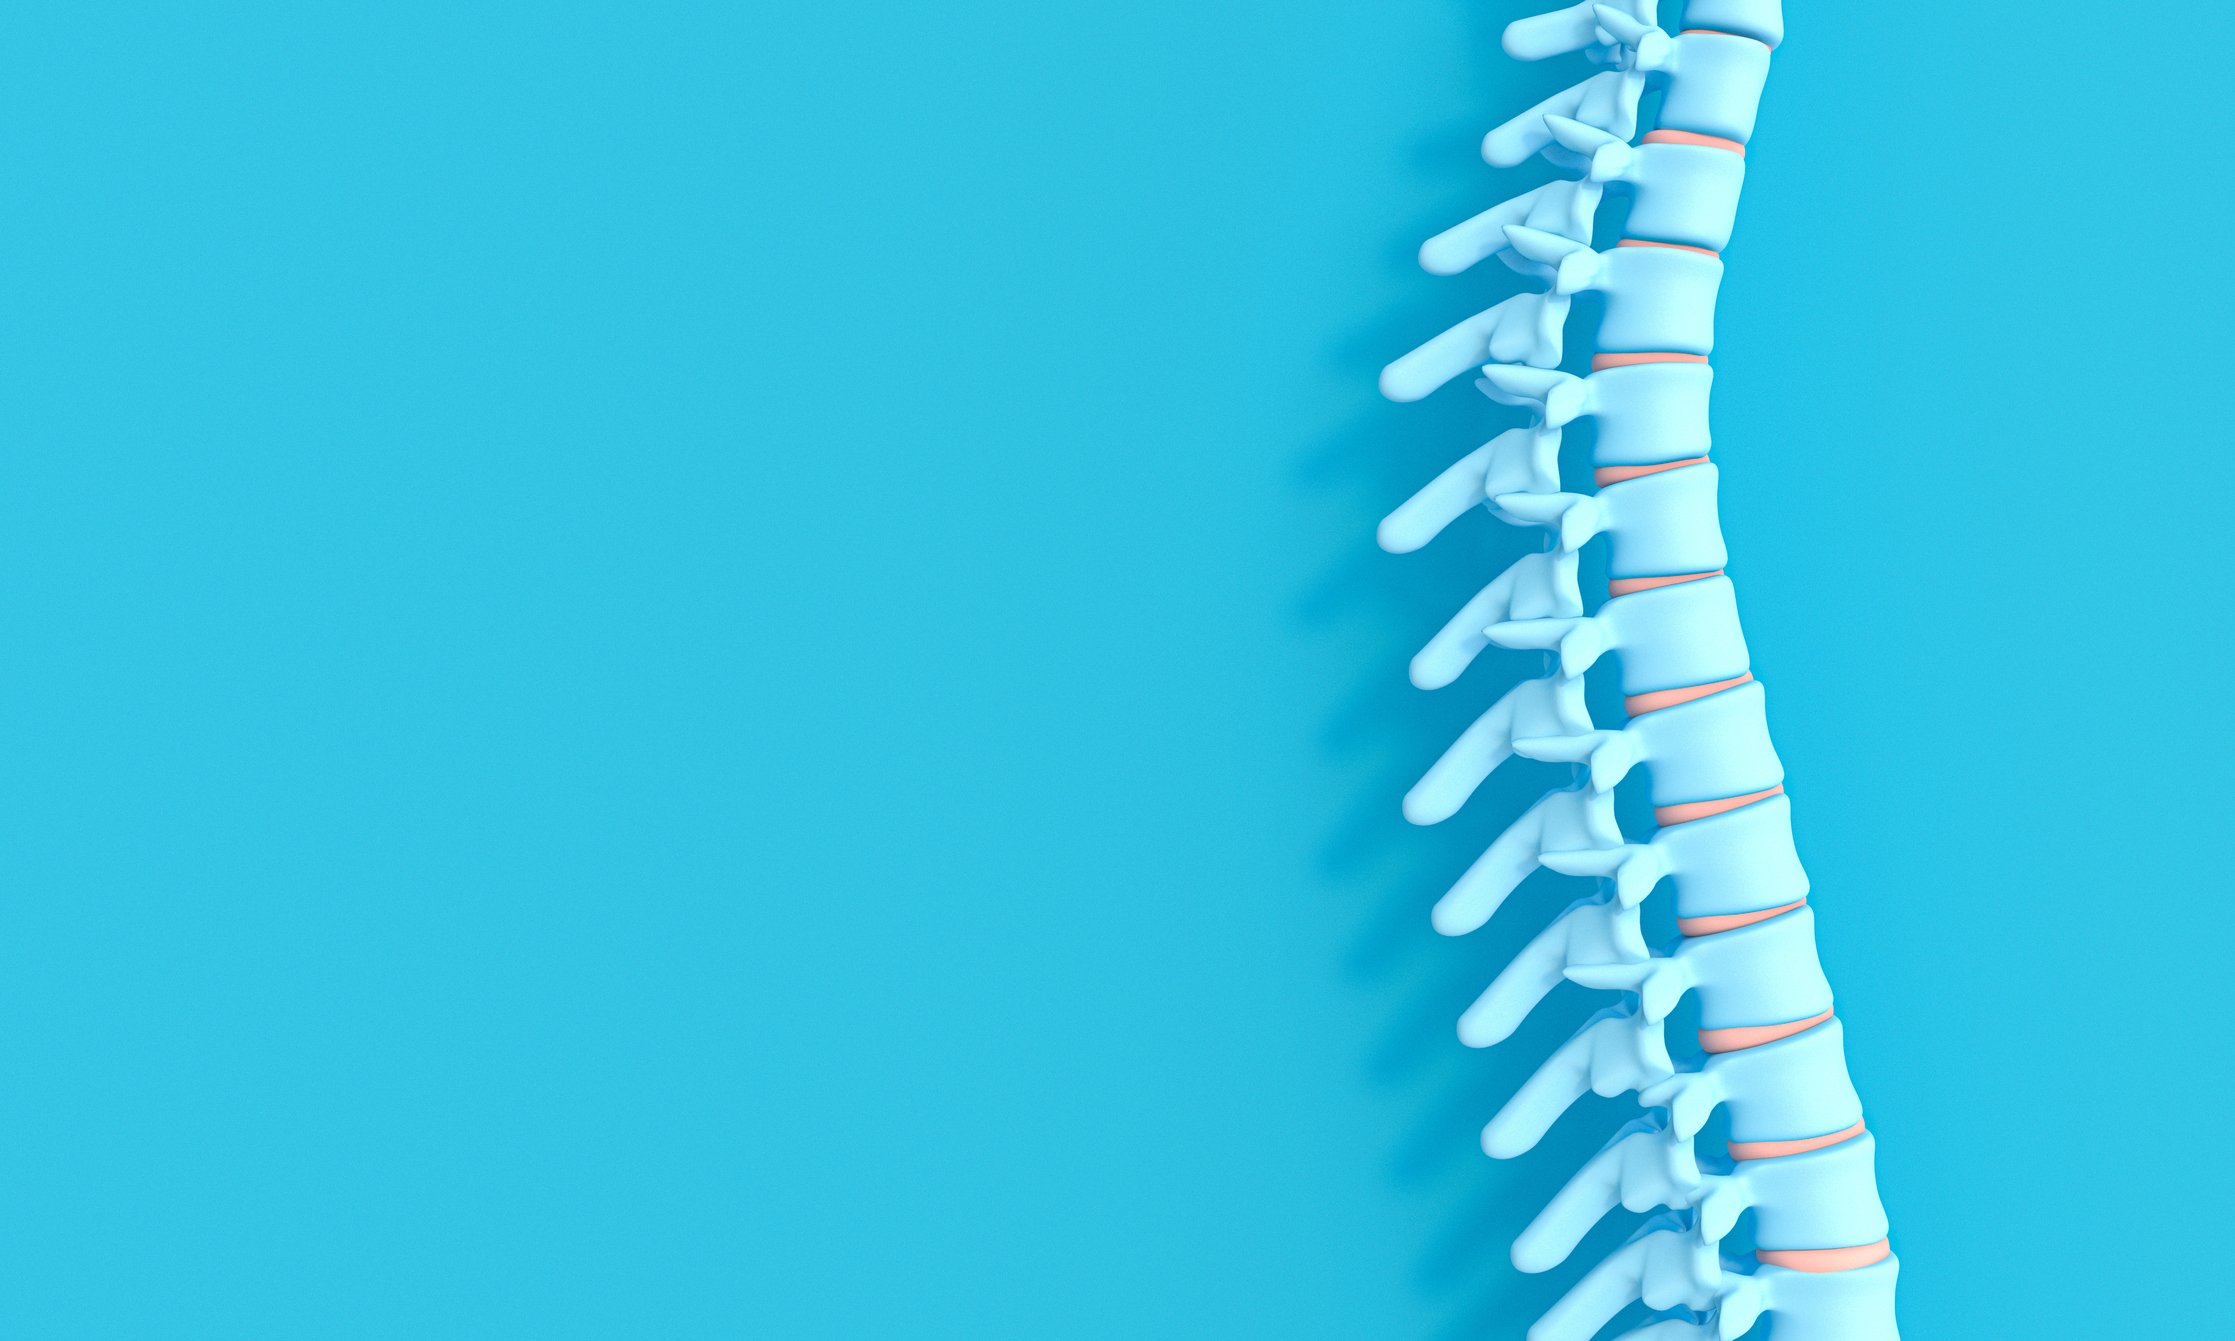 Accelus accelerates expansion of spine implant tech with $20M infusion